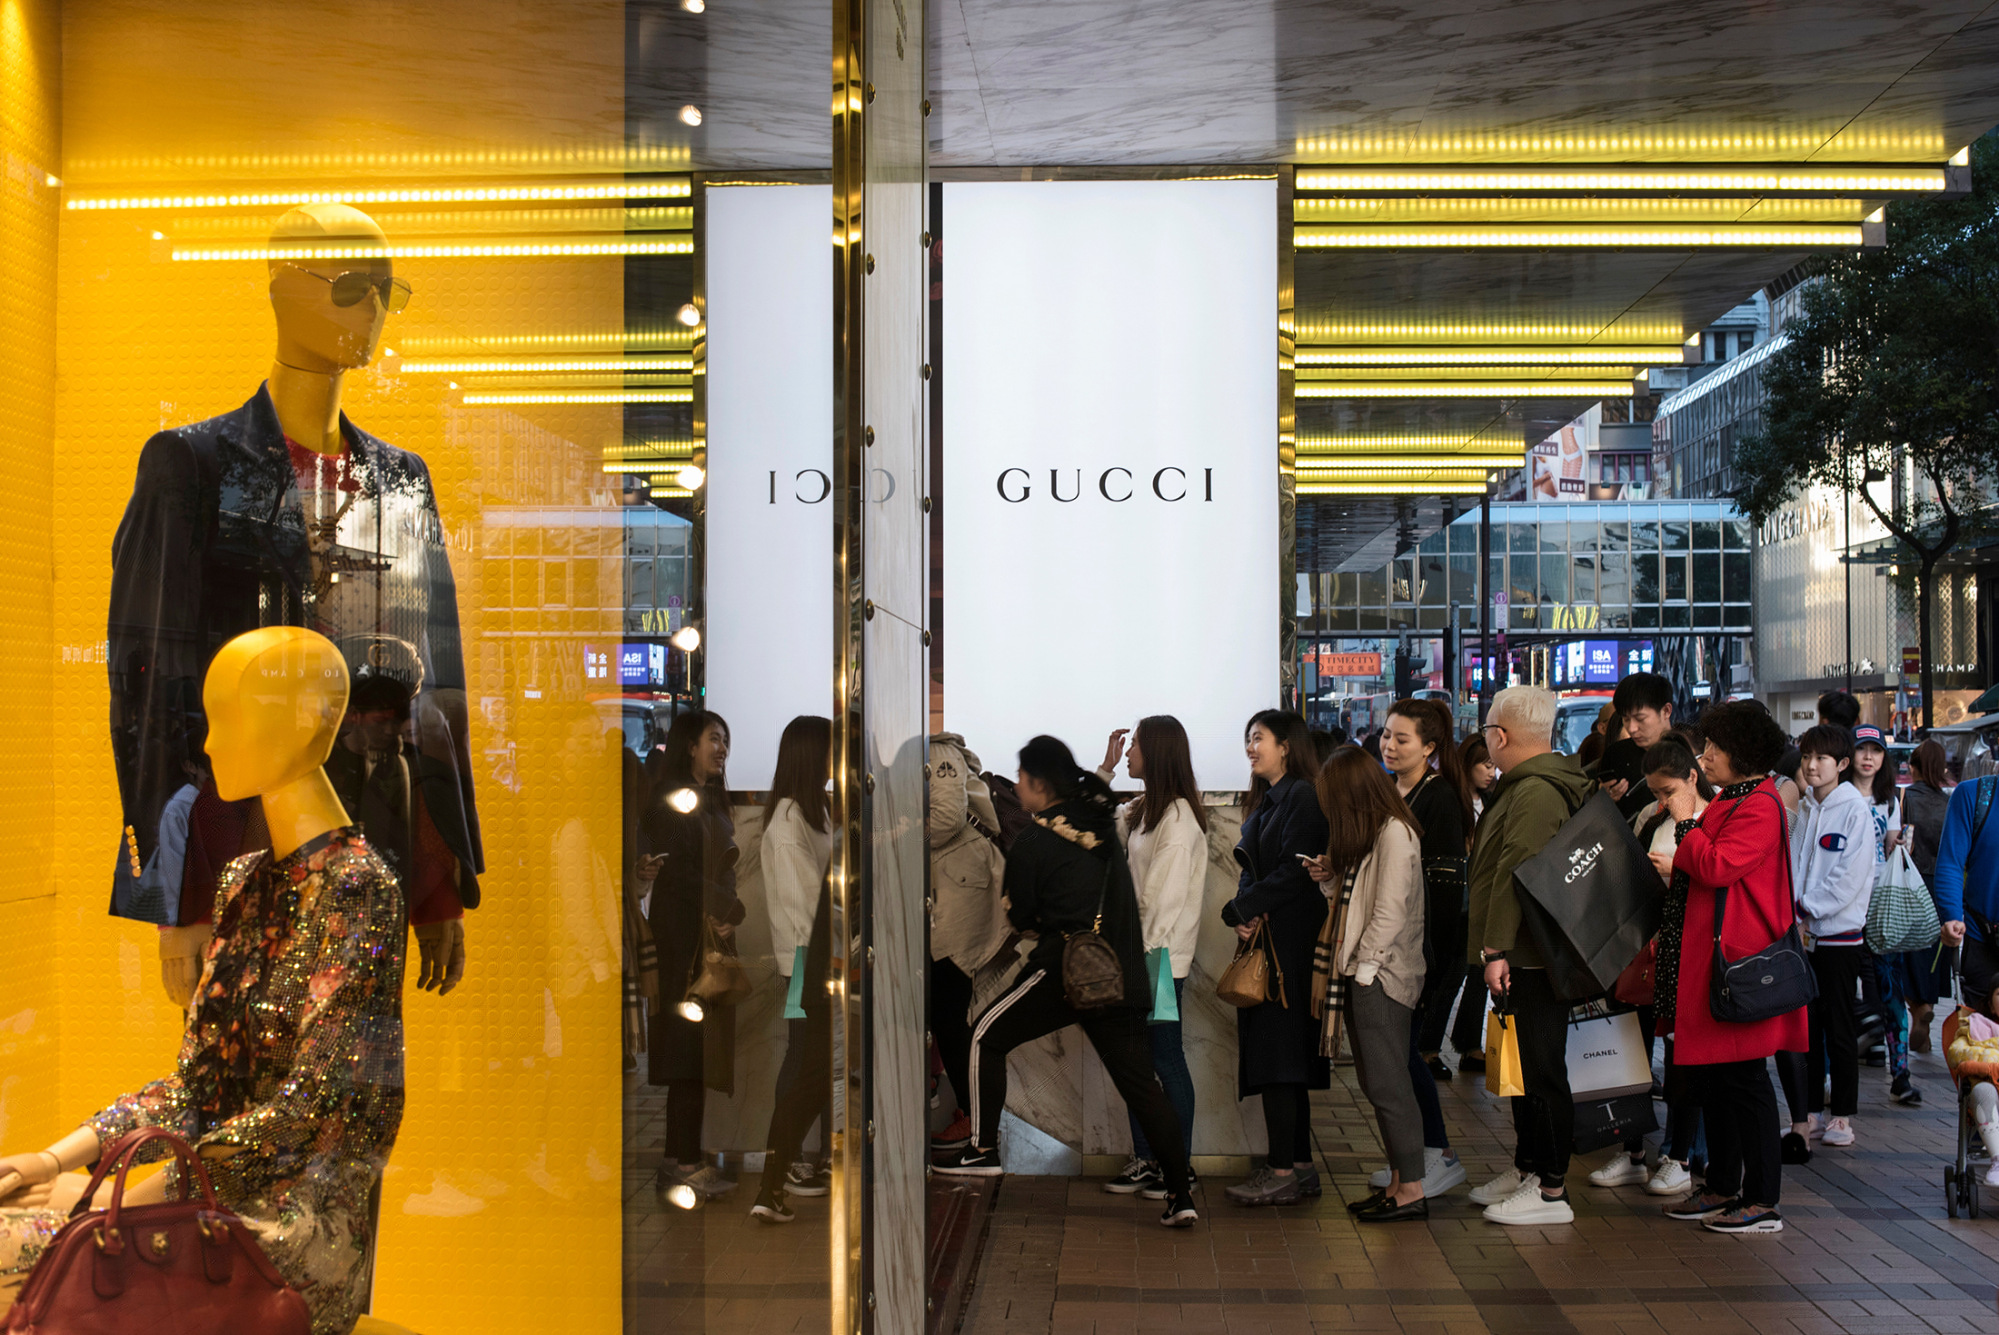 LVMH Sets Upbeat Tone for Luxury Brands - Bloomberg